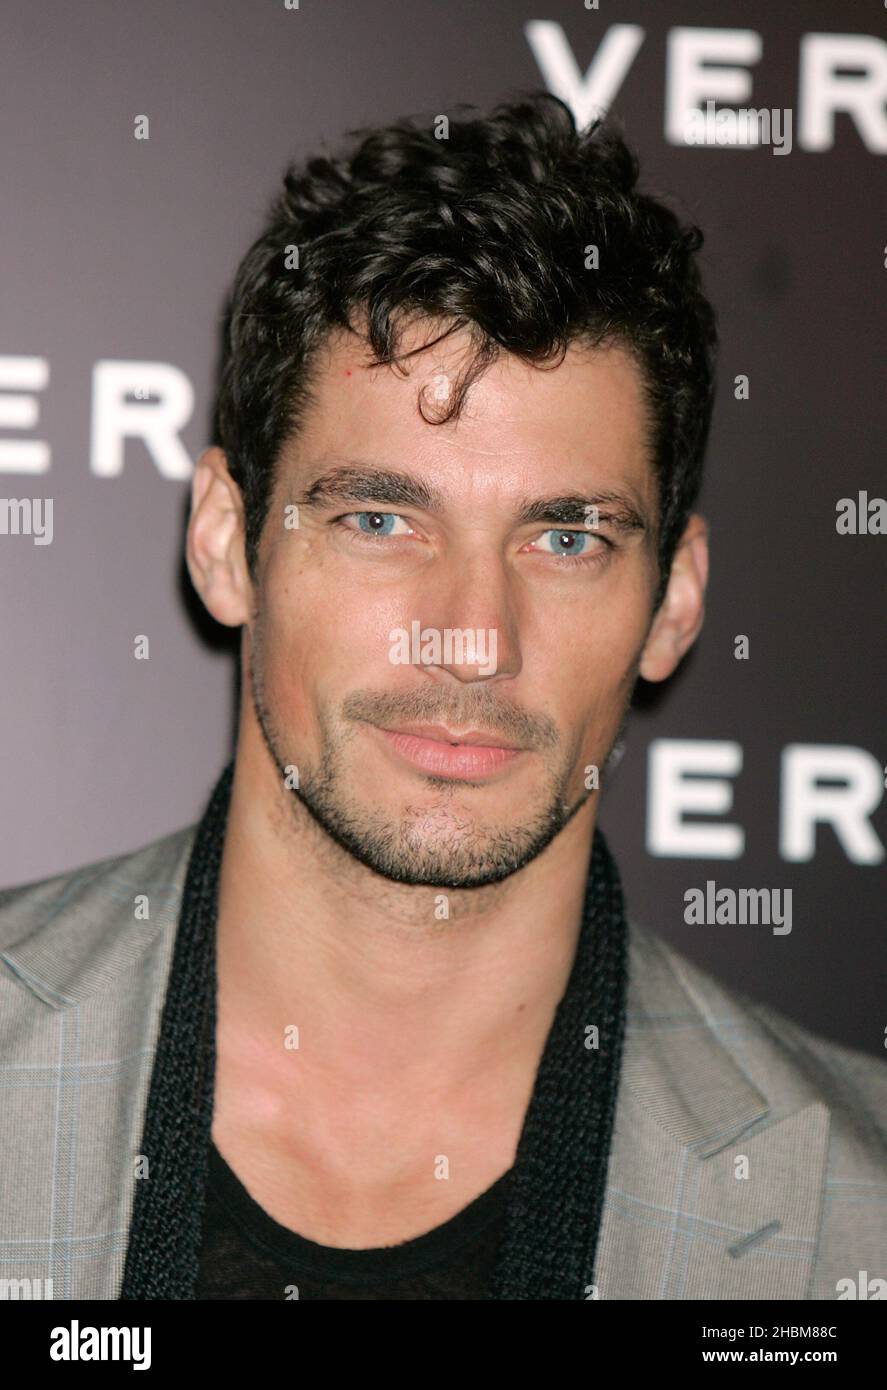 David Gandy attends the Samsung Vertu Mobile Phone Launch at Lancaster House,London on 12 October ,2010. Stock Photo